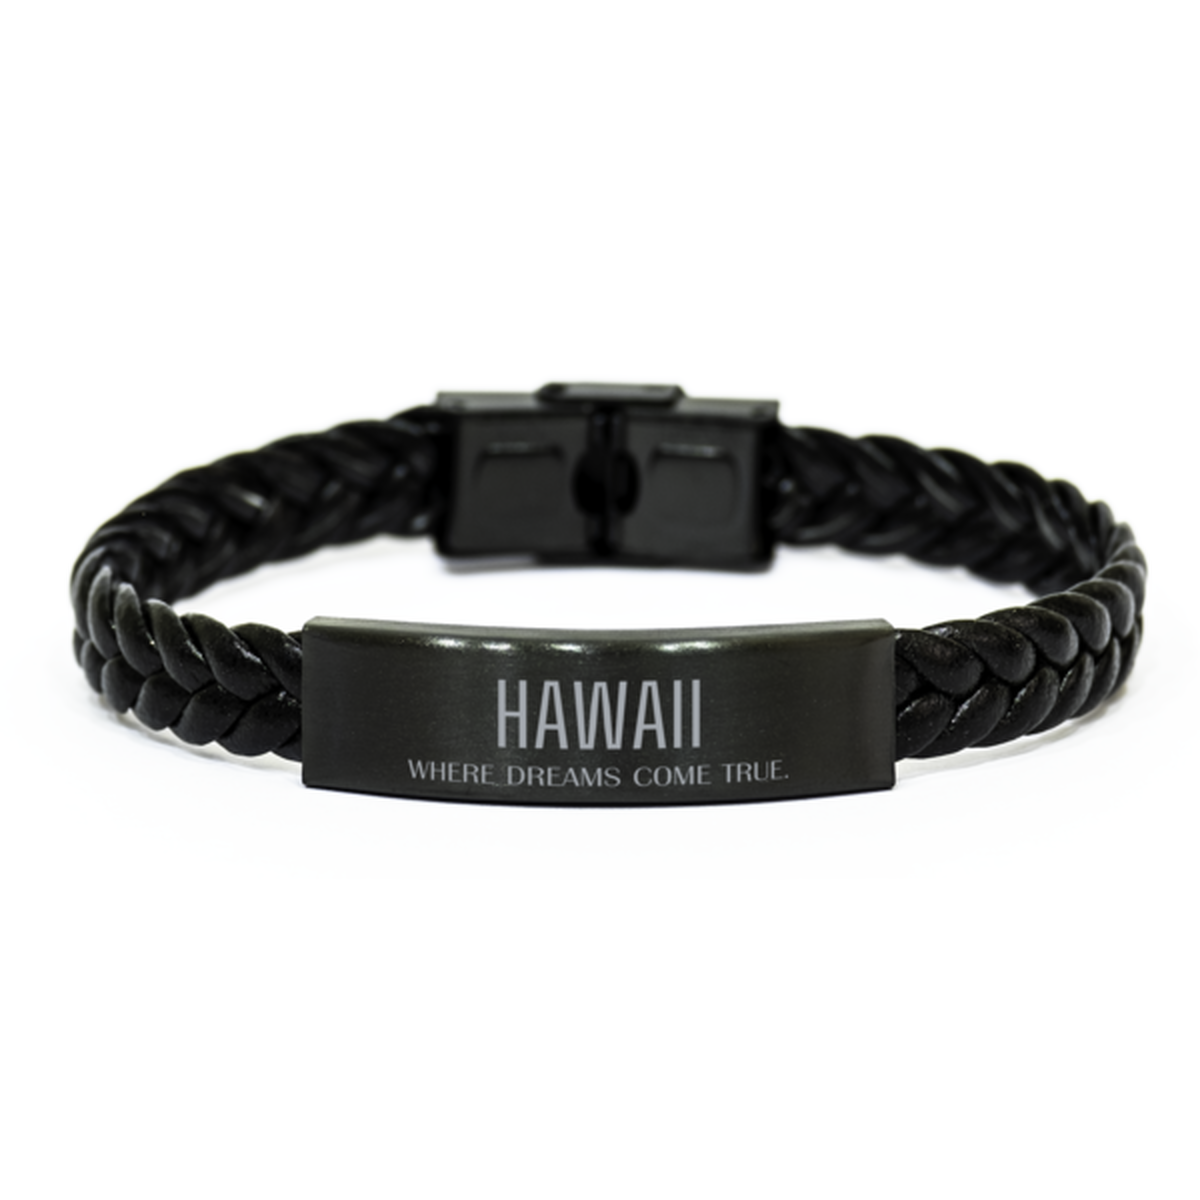 Love Hawaii State Braided Leather Bracelet, Hawaii Where dreams come true, Birthday Inspirational Gifts For Hawaii Men, Women, Friends